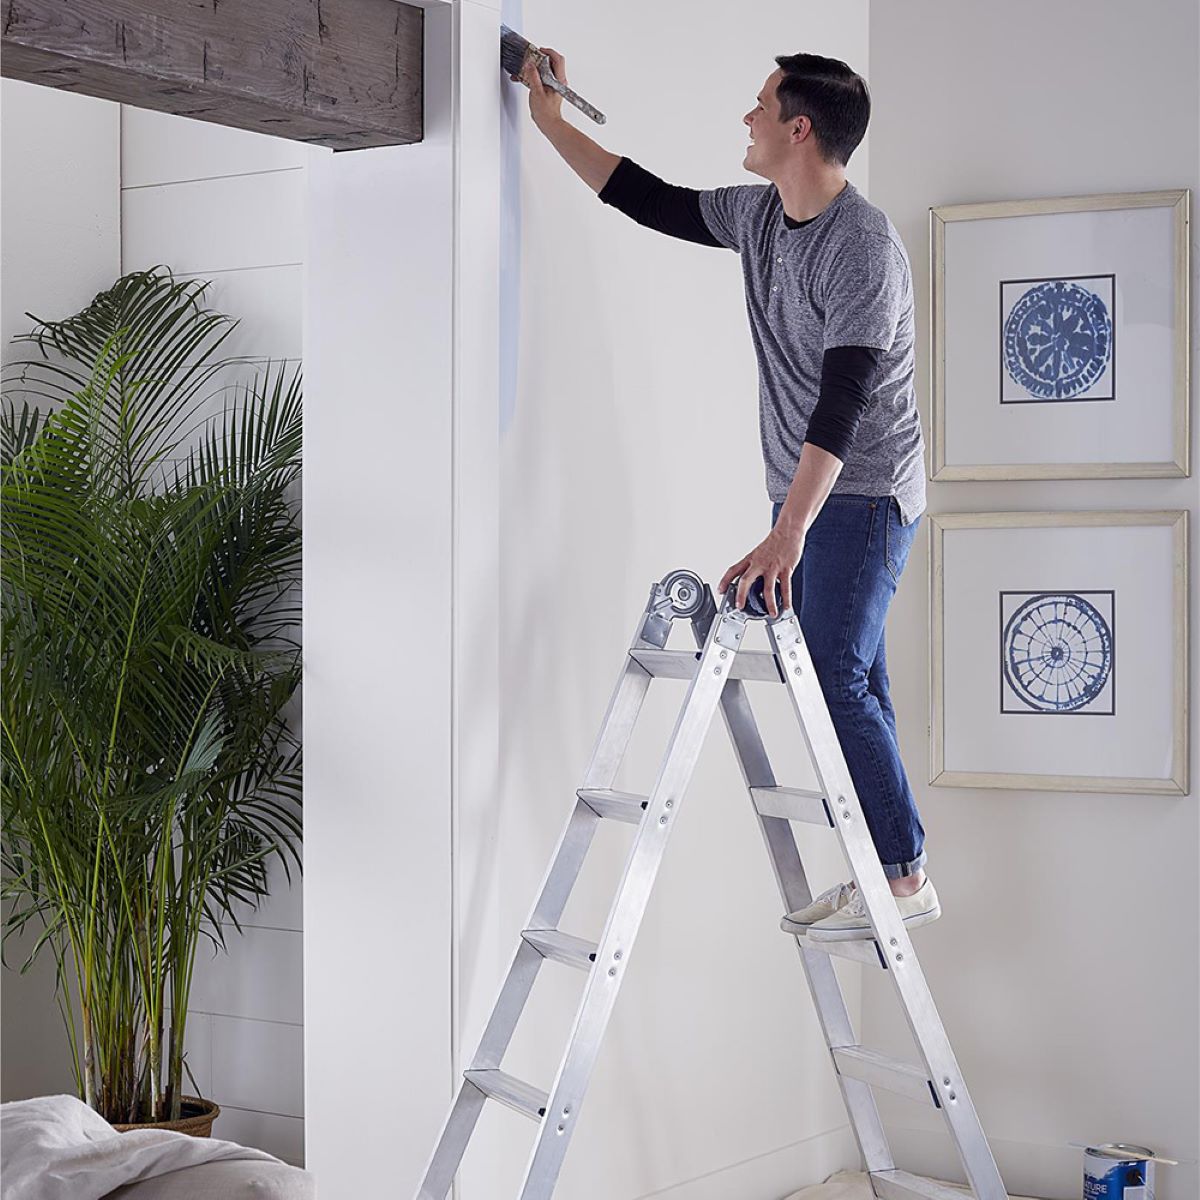 How High Can A Person Safely Climb On A Step Ladder